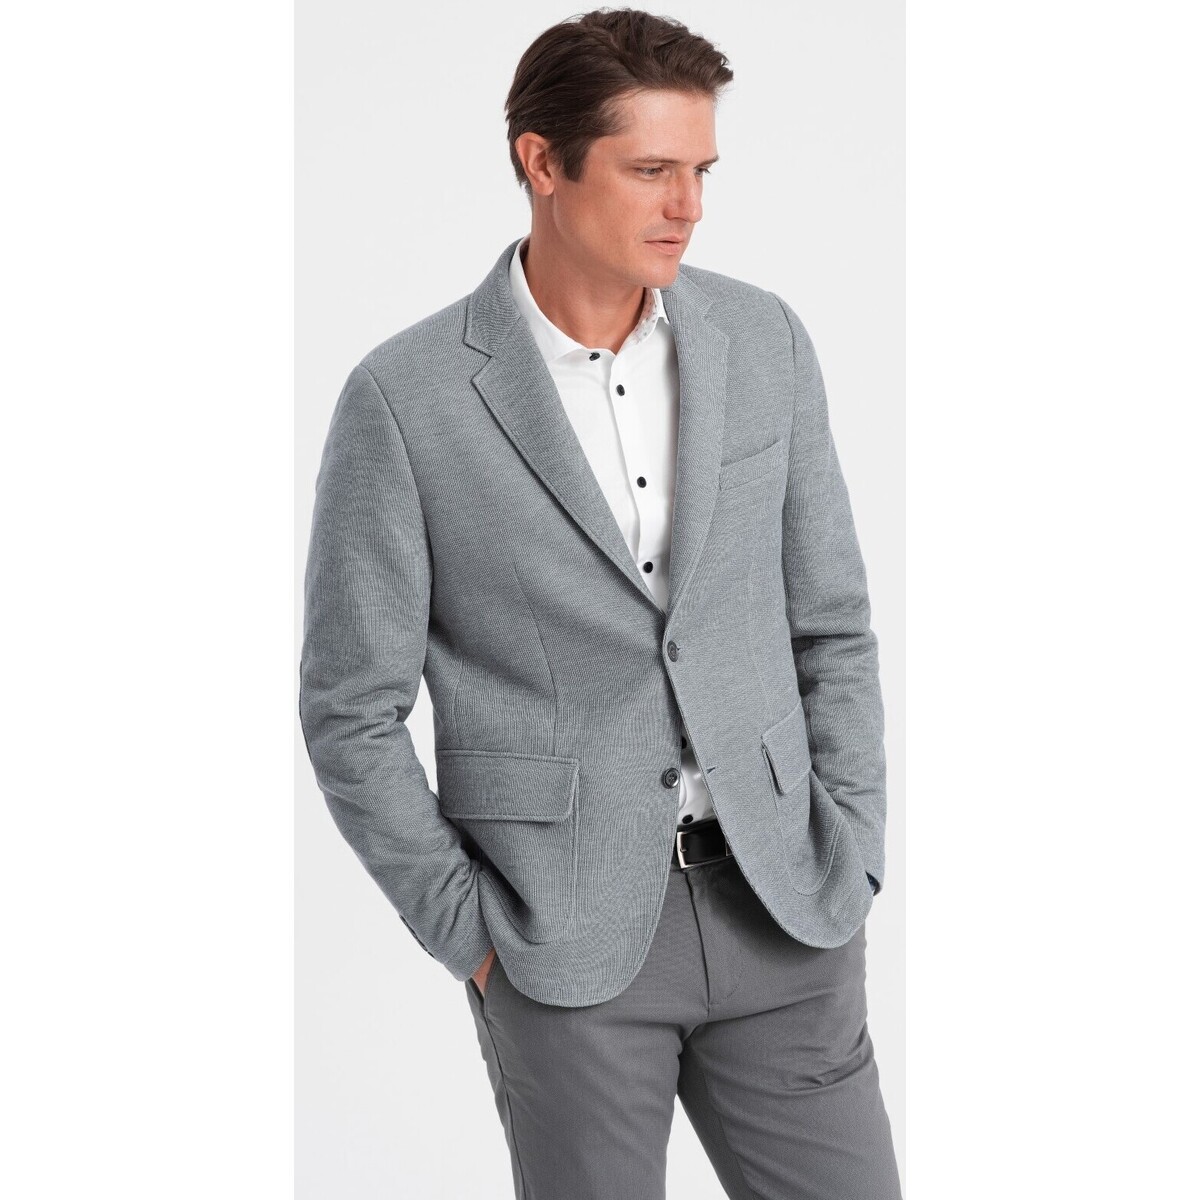 Ombre  Men apos;s jacket with elbow patches - light grey V1 OM-BLZB  Šedá